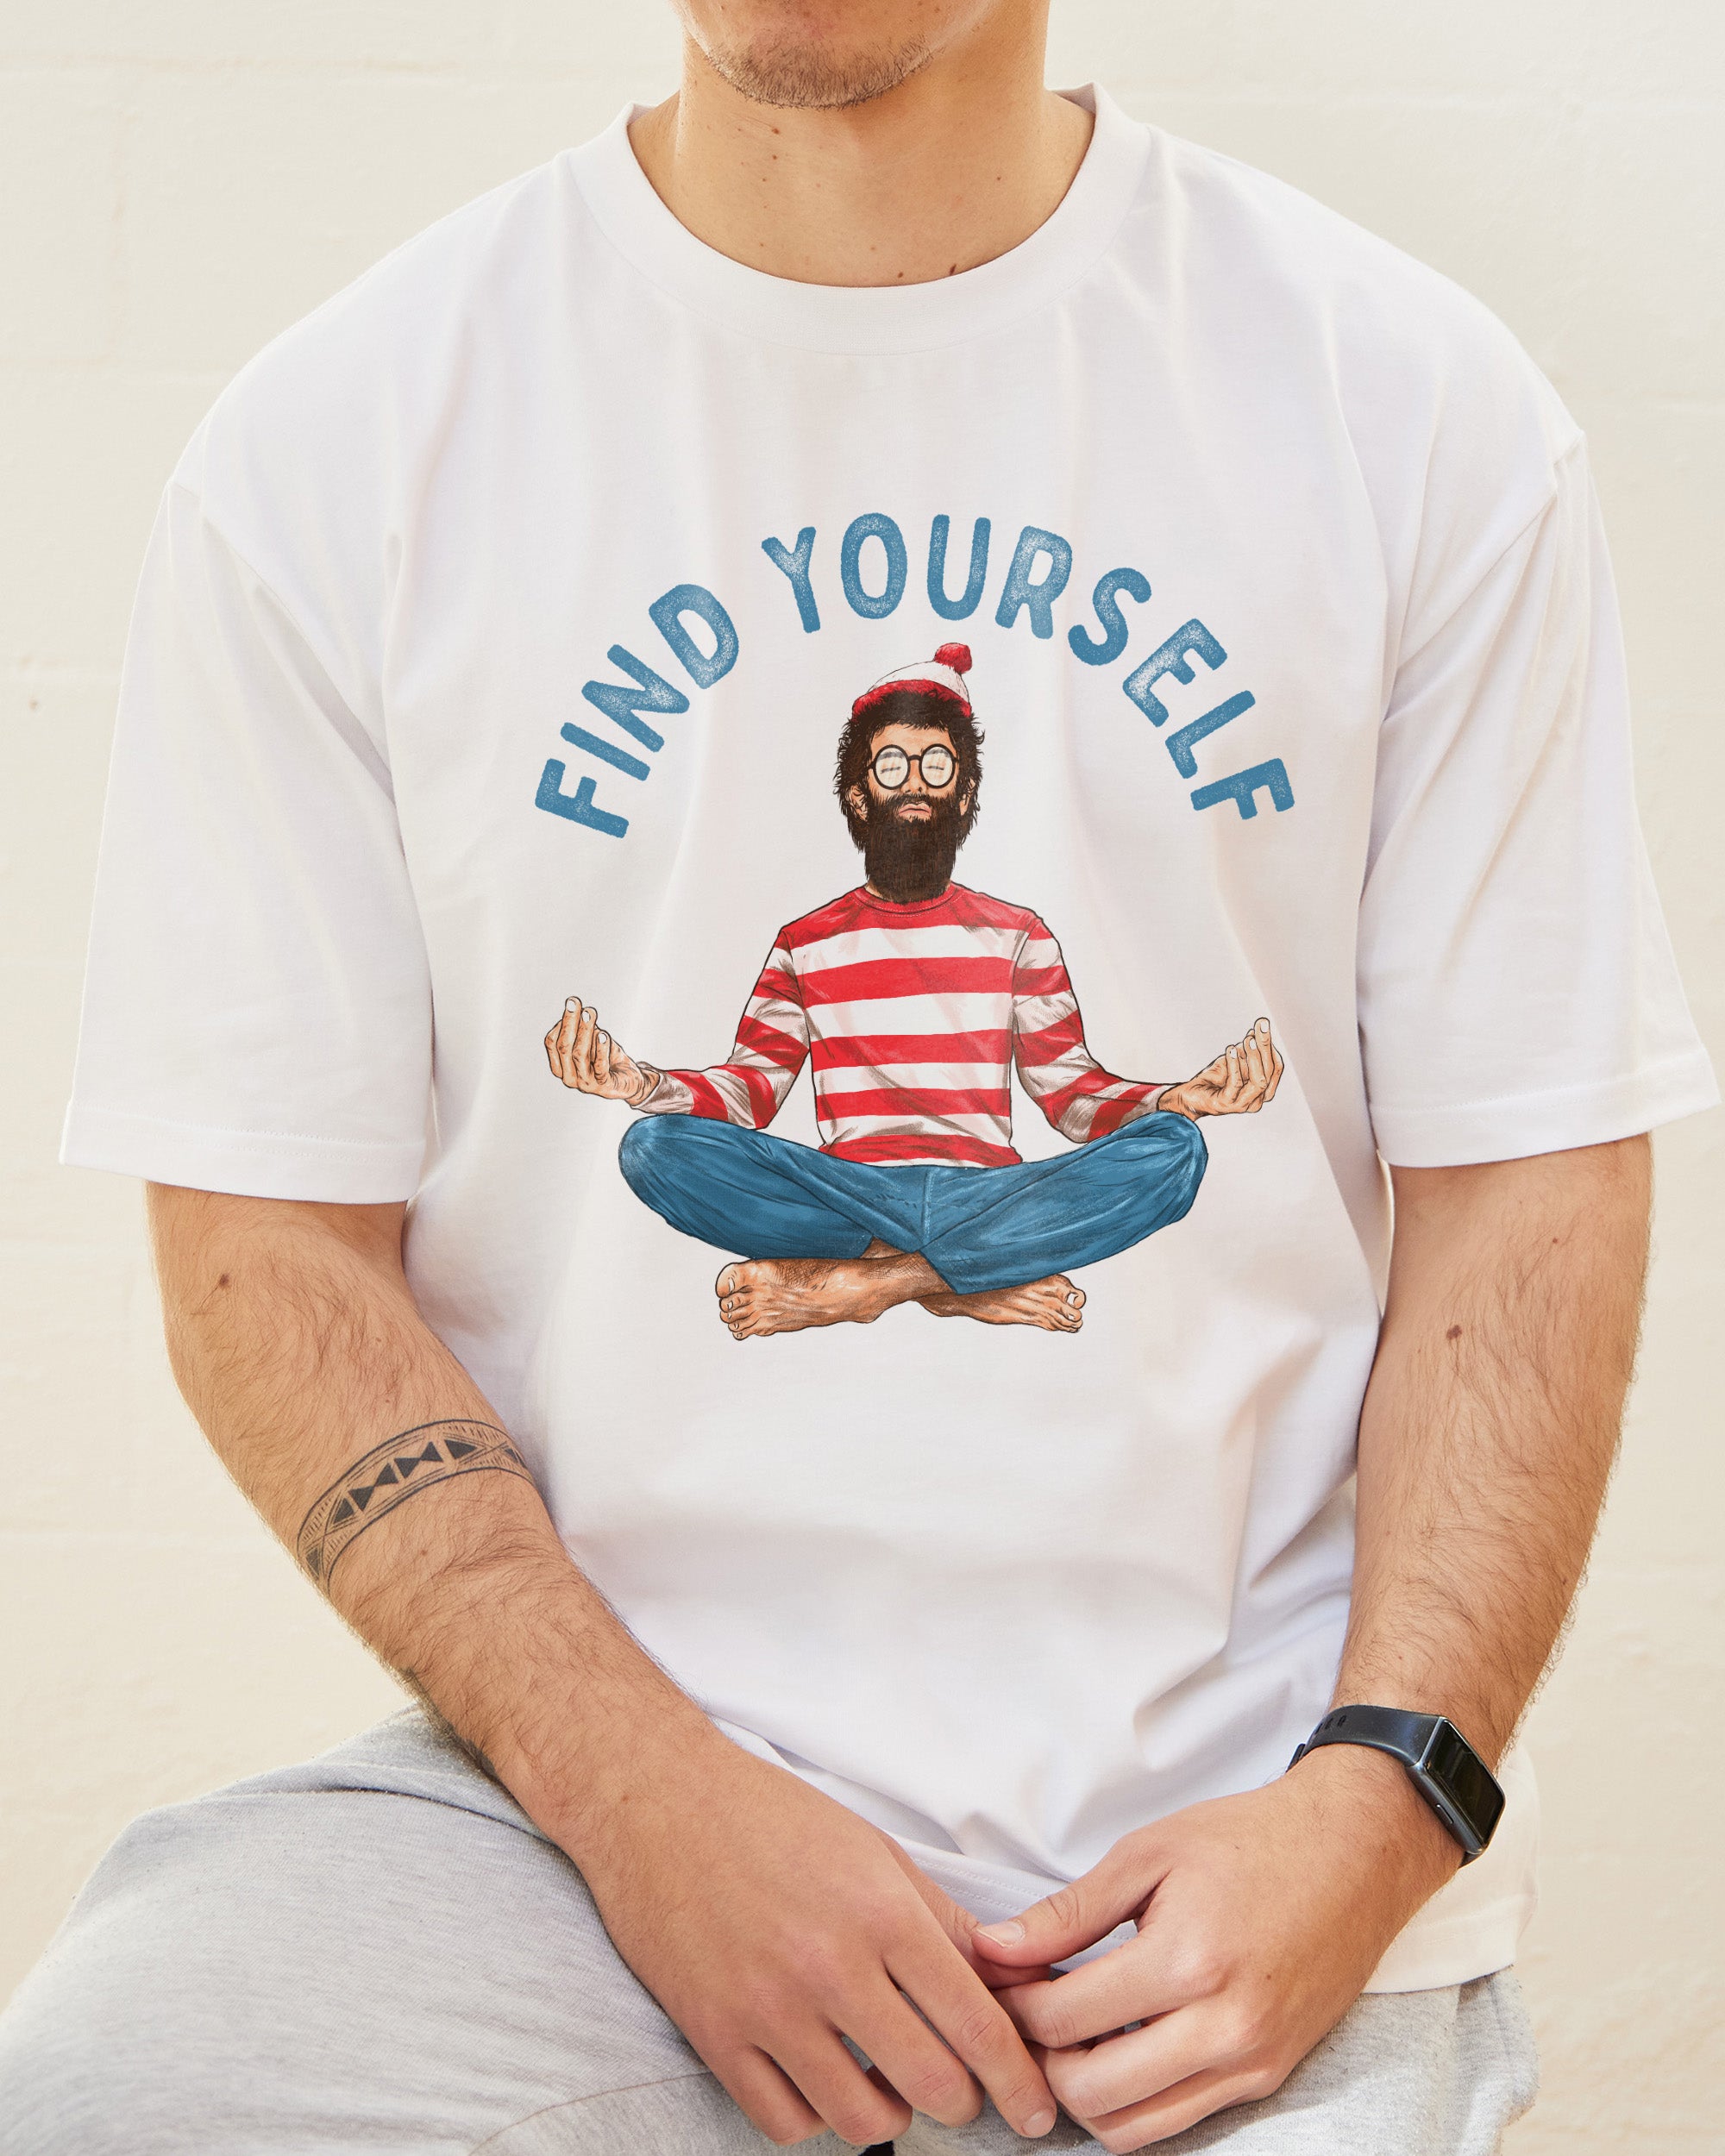 Find Yourself Wally T-Shirt Australia Online